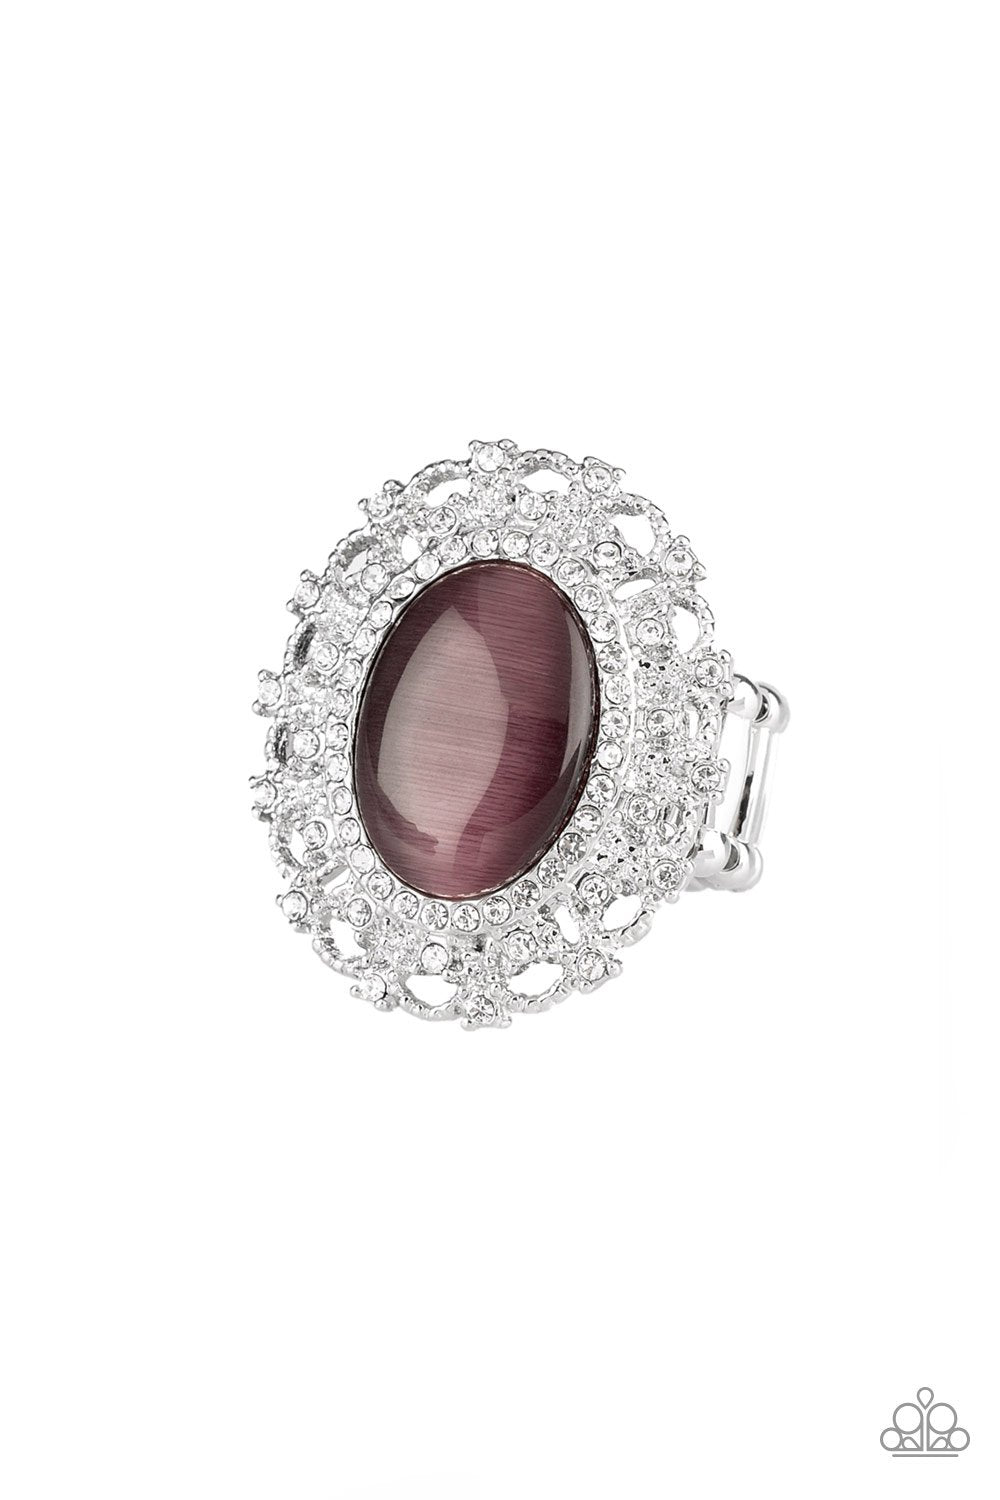 Baroque The Spell Purple Moonstone Ring - Paparazzi Accessories-CarasShop.com - $5 Jewelry by Cara Jewels